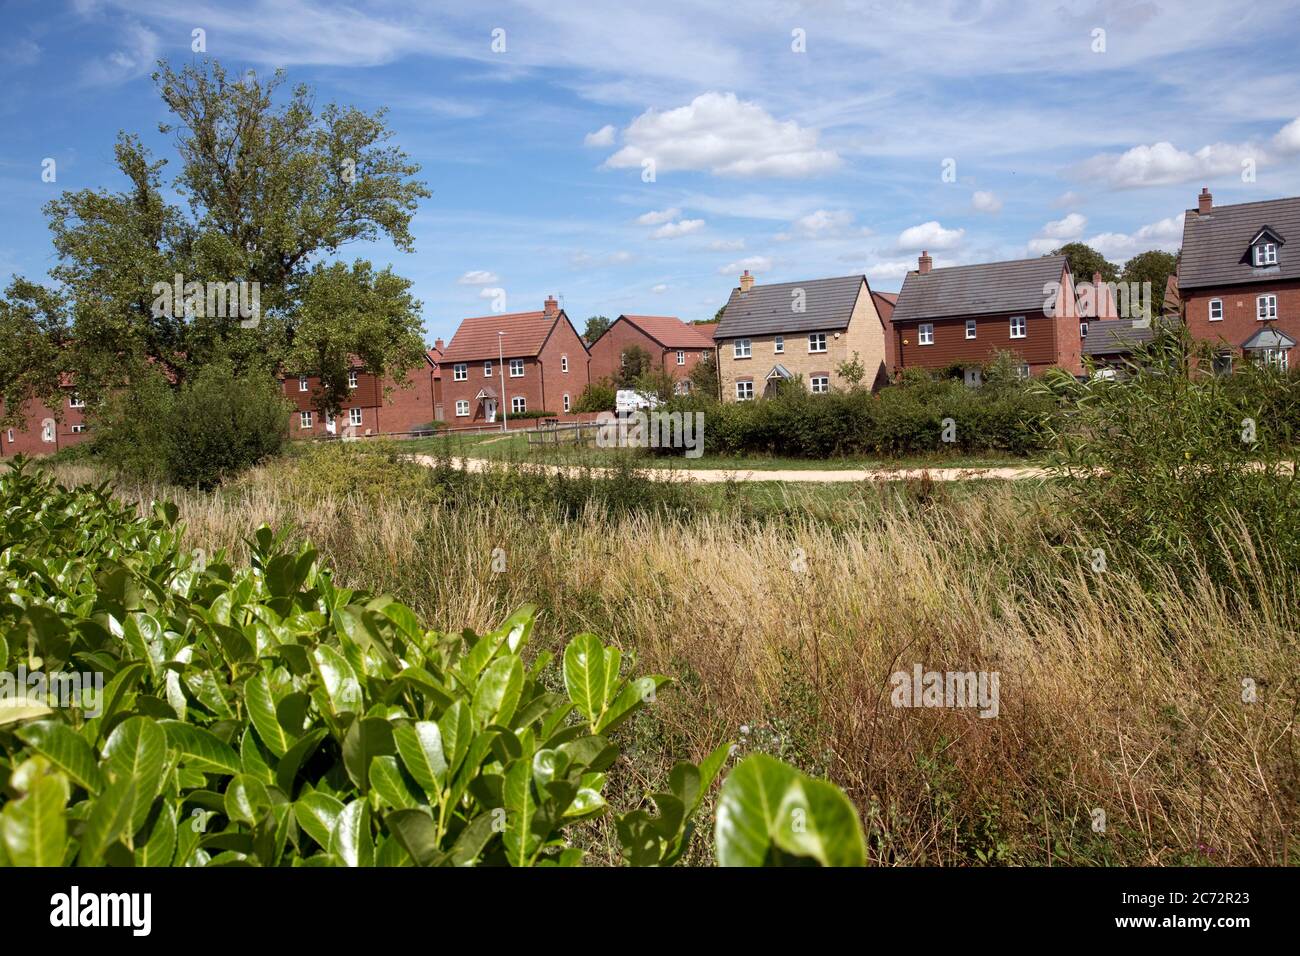 Long Marston Garden Village, proposed development of community of 4000 attractive well-designed high quality homes houses on former brownfield site wi Stock Photo